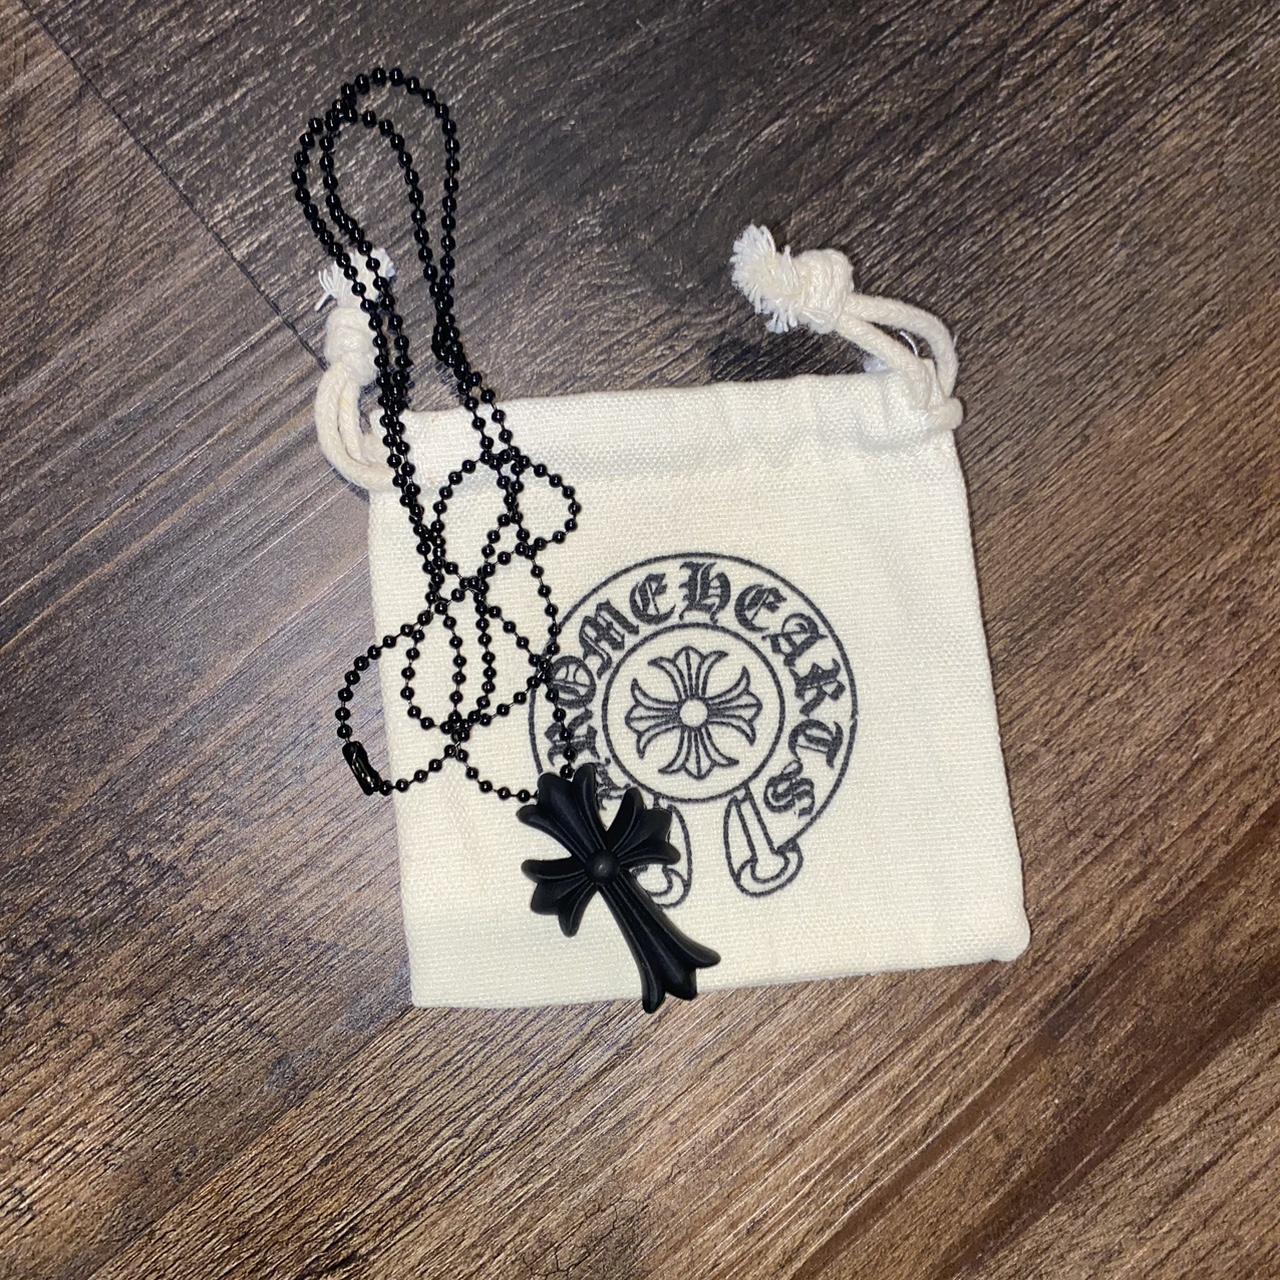 Chrome hearts 20th anniversary necklace - Depop